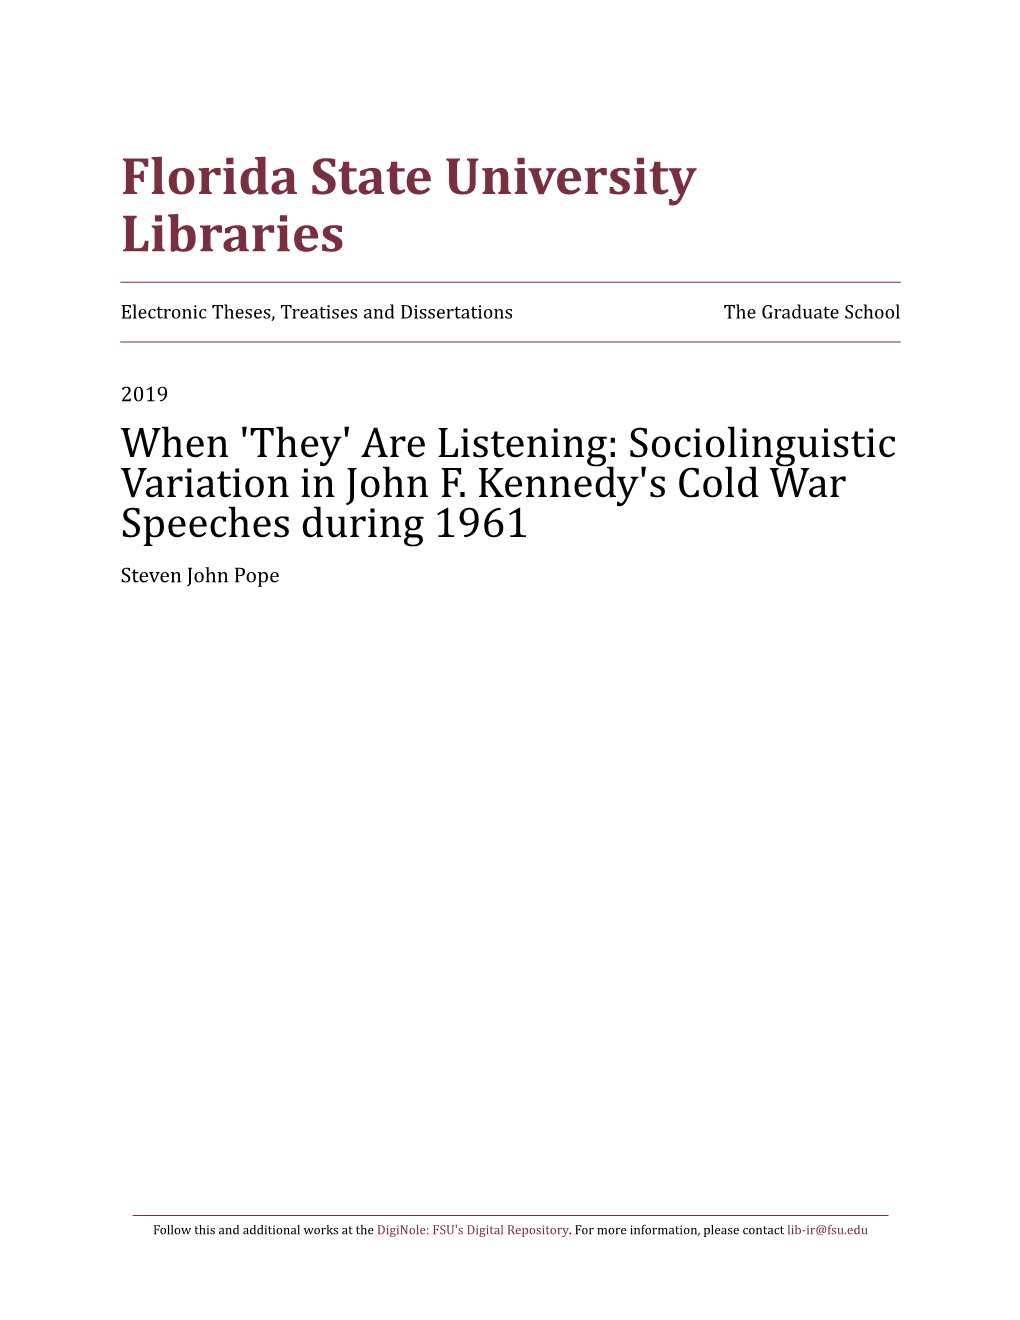 'They' Are Listening: Sociolinguistic Variation in John F. Kennedy's Cold War Speeches During 1961